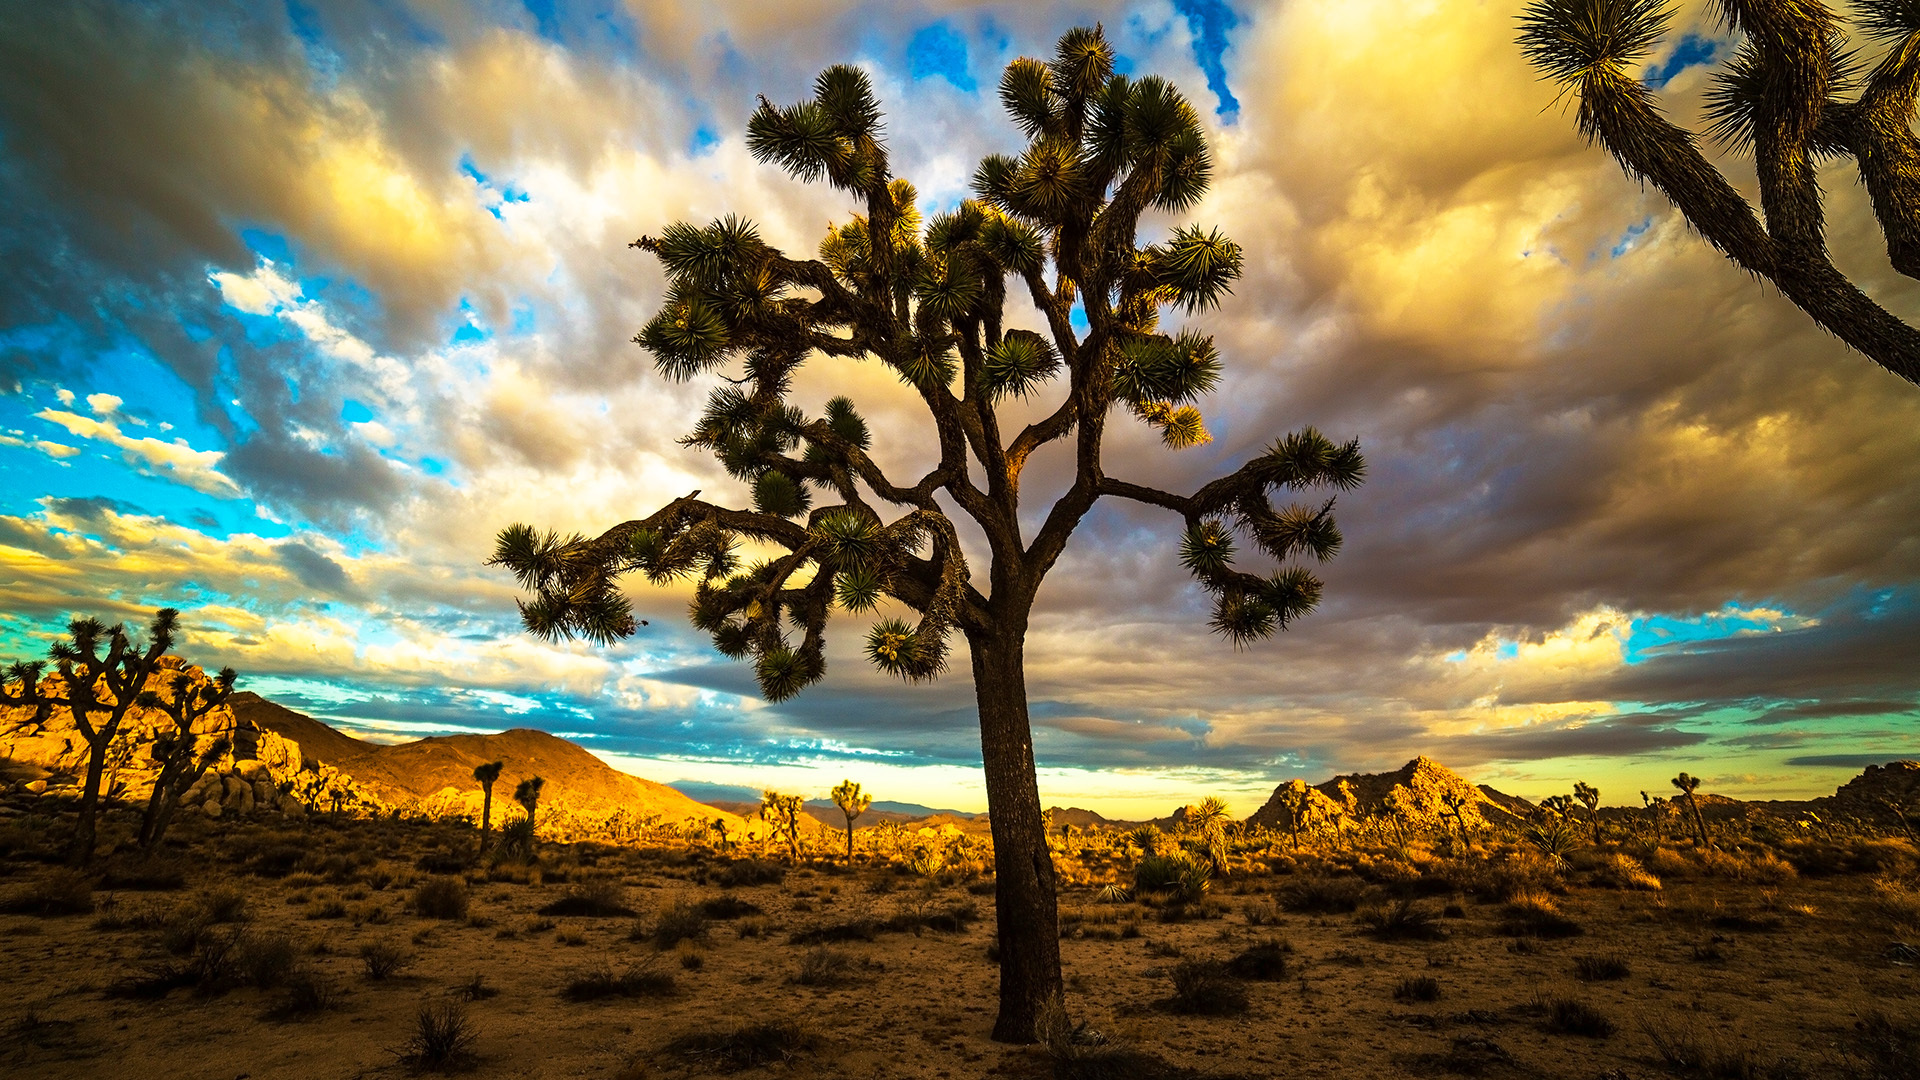 A planned solar farm in the Mojave Desert may lead to the destruction of thousands of protected Joshua trees and harm other local species.